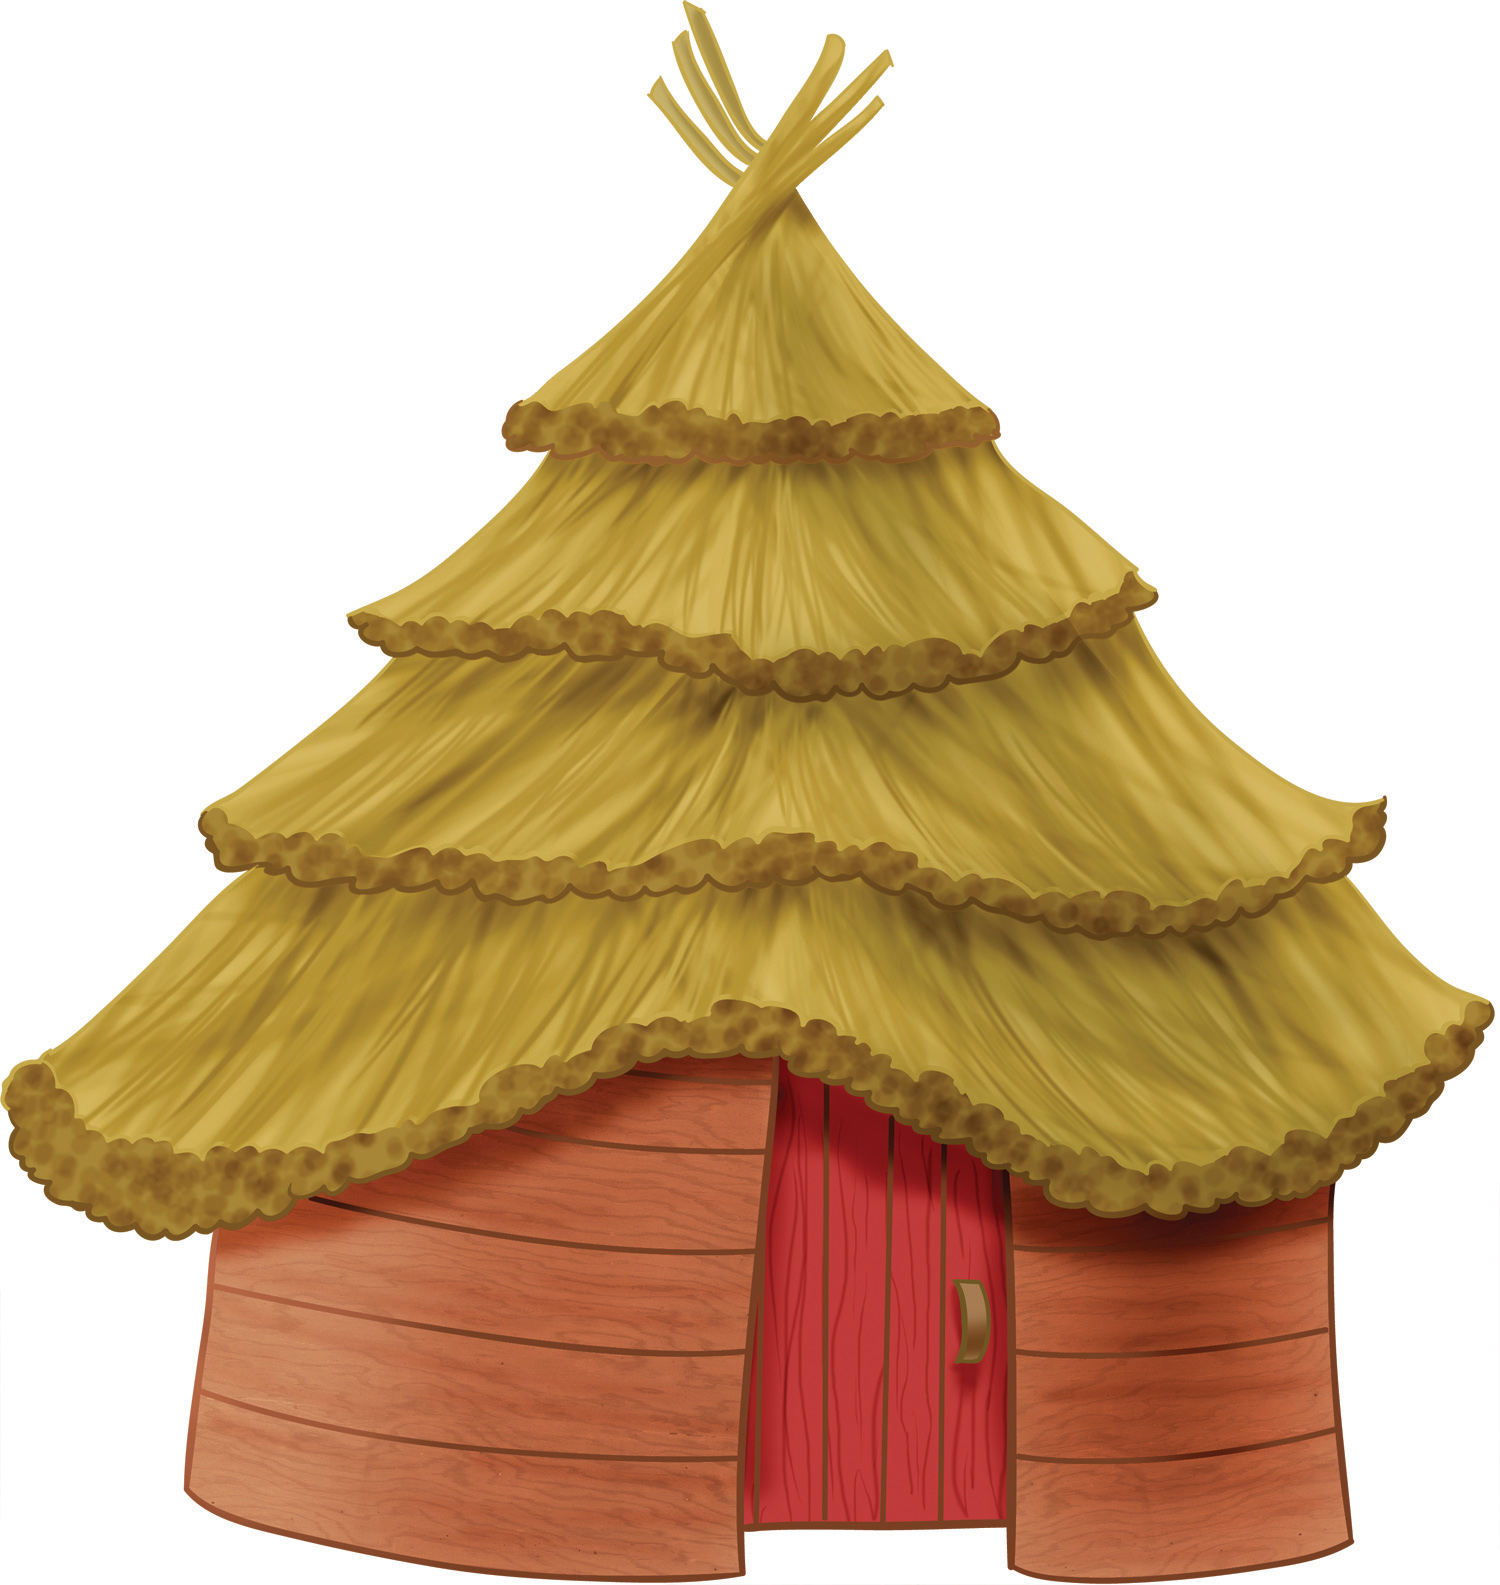 African Hut Drawing at GetDrawings Free download